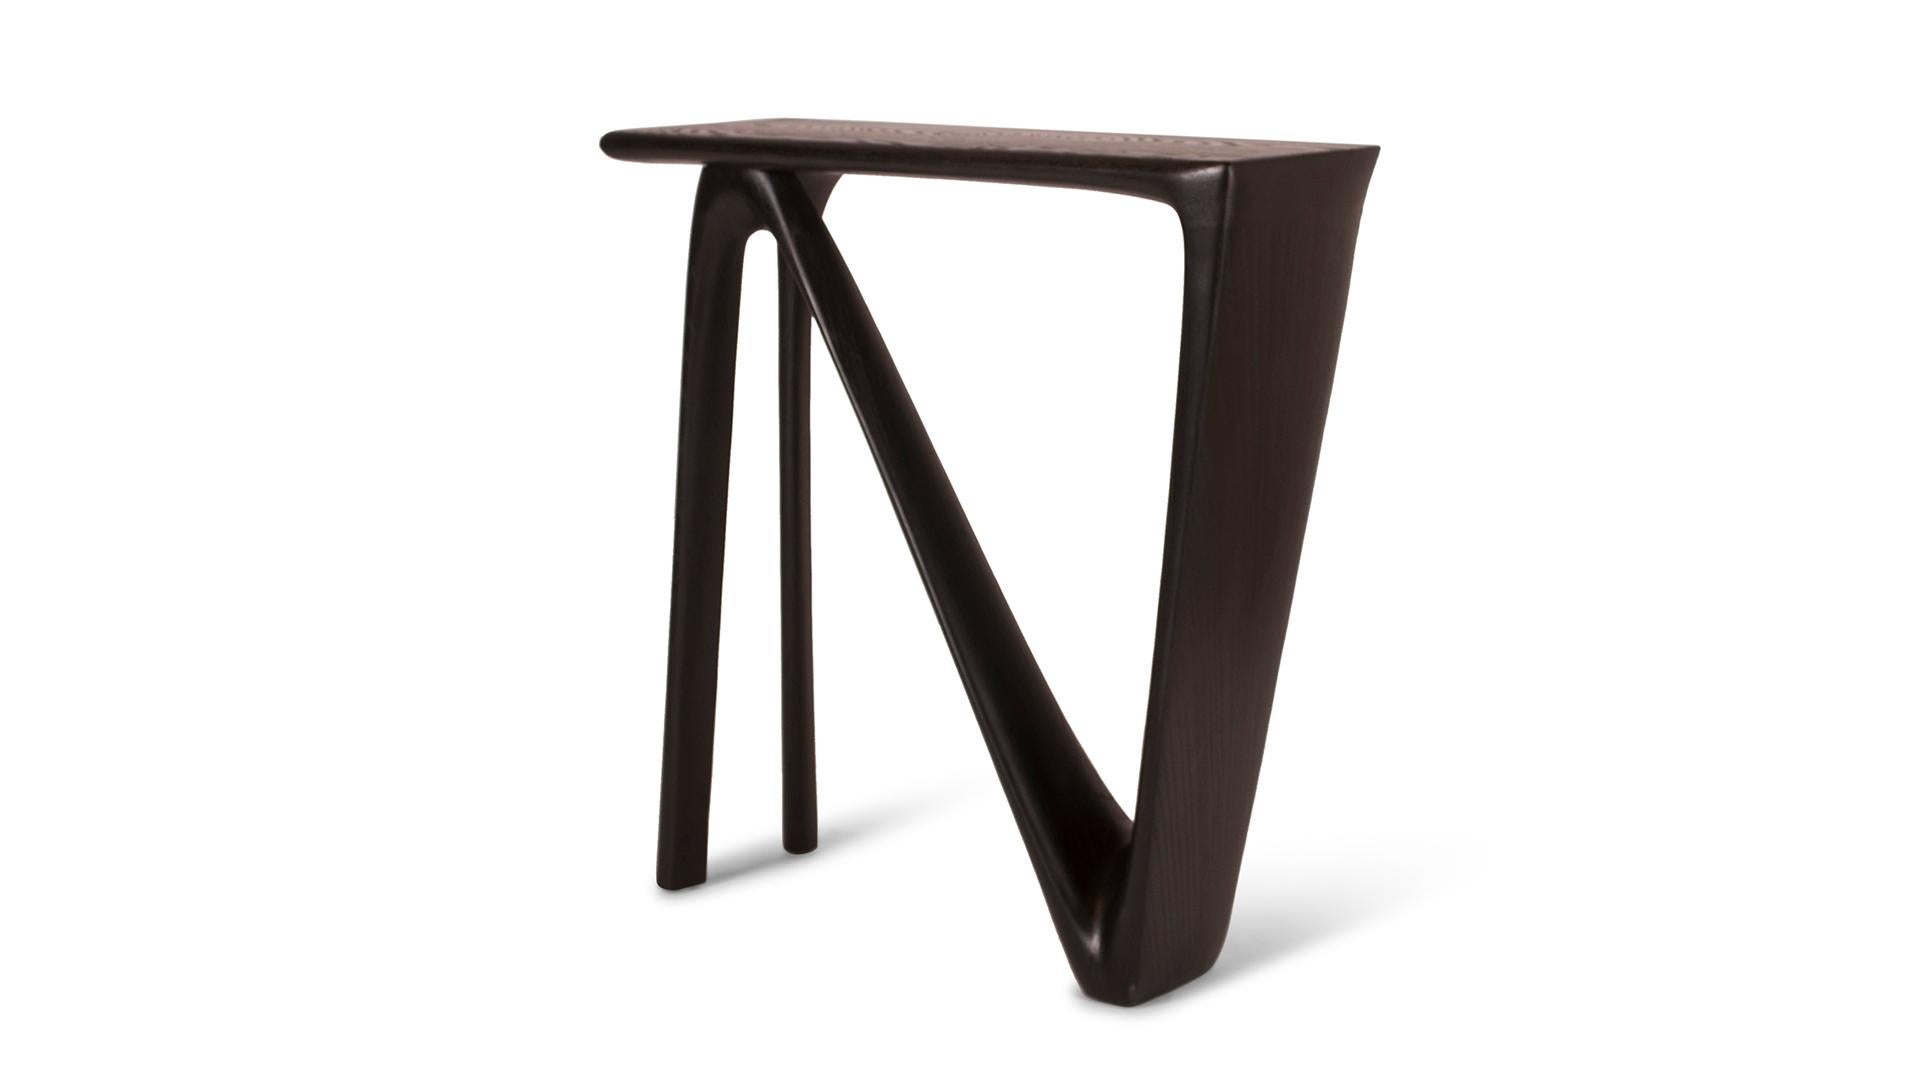 Amorph Astra console table solid ash wood with Ebony stain. Available in different finishes and custom sizes.
Our company, Amorph, is located in Los Angeles. It was born to make outstanding changes in the furniture design industry!

It is available